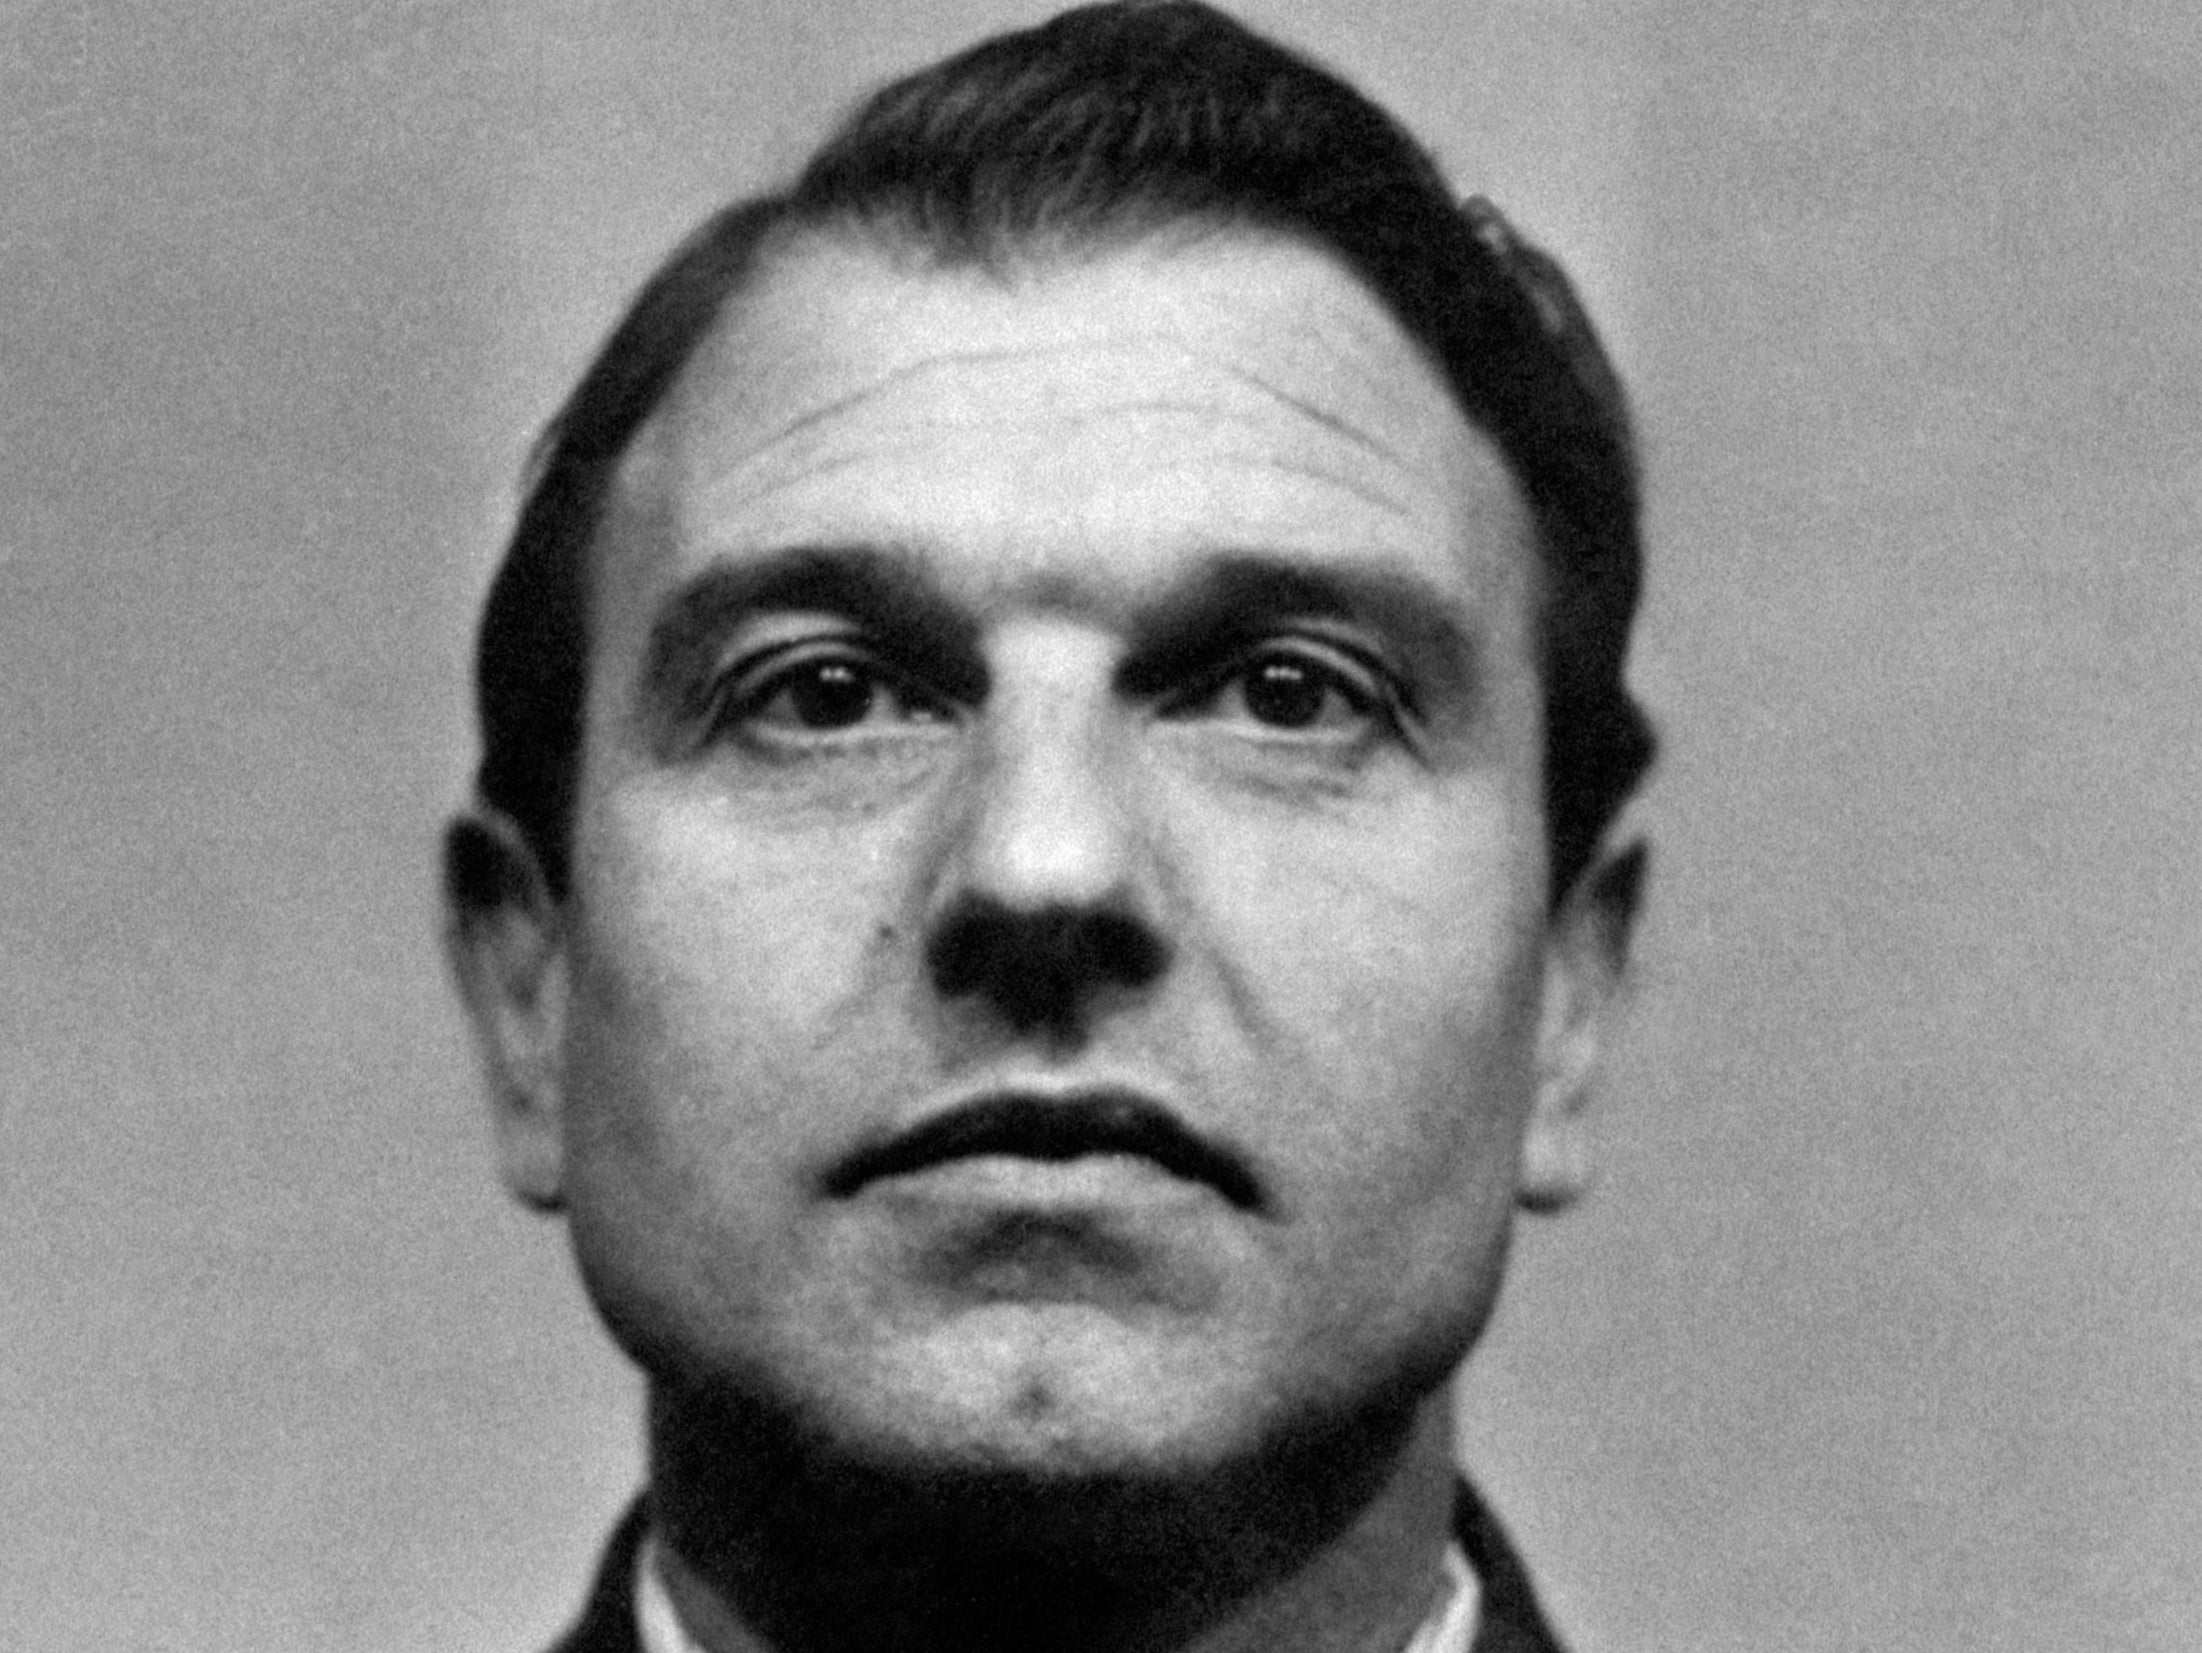 Blake escaped from Wormwood Scrubs prison in October 1966, after serving five and a half years of his 42-year sentence for giving away government secrets